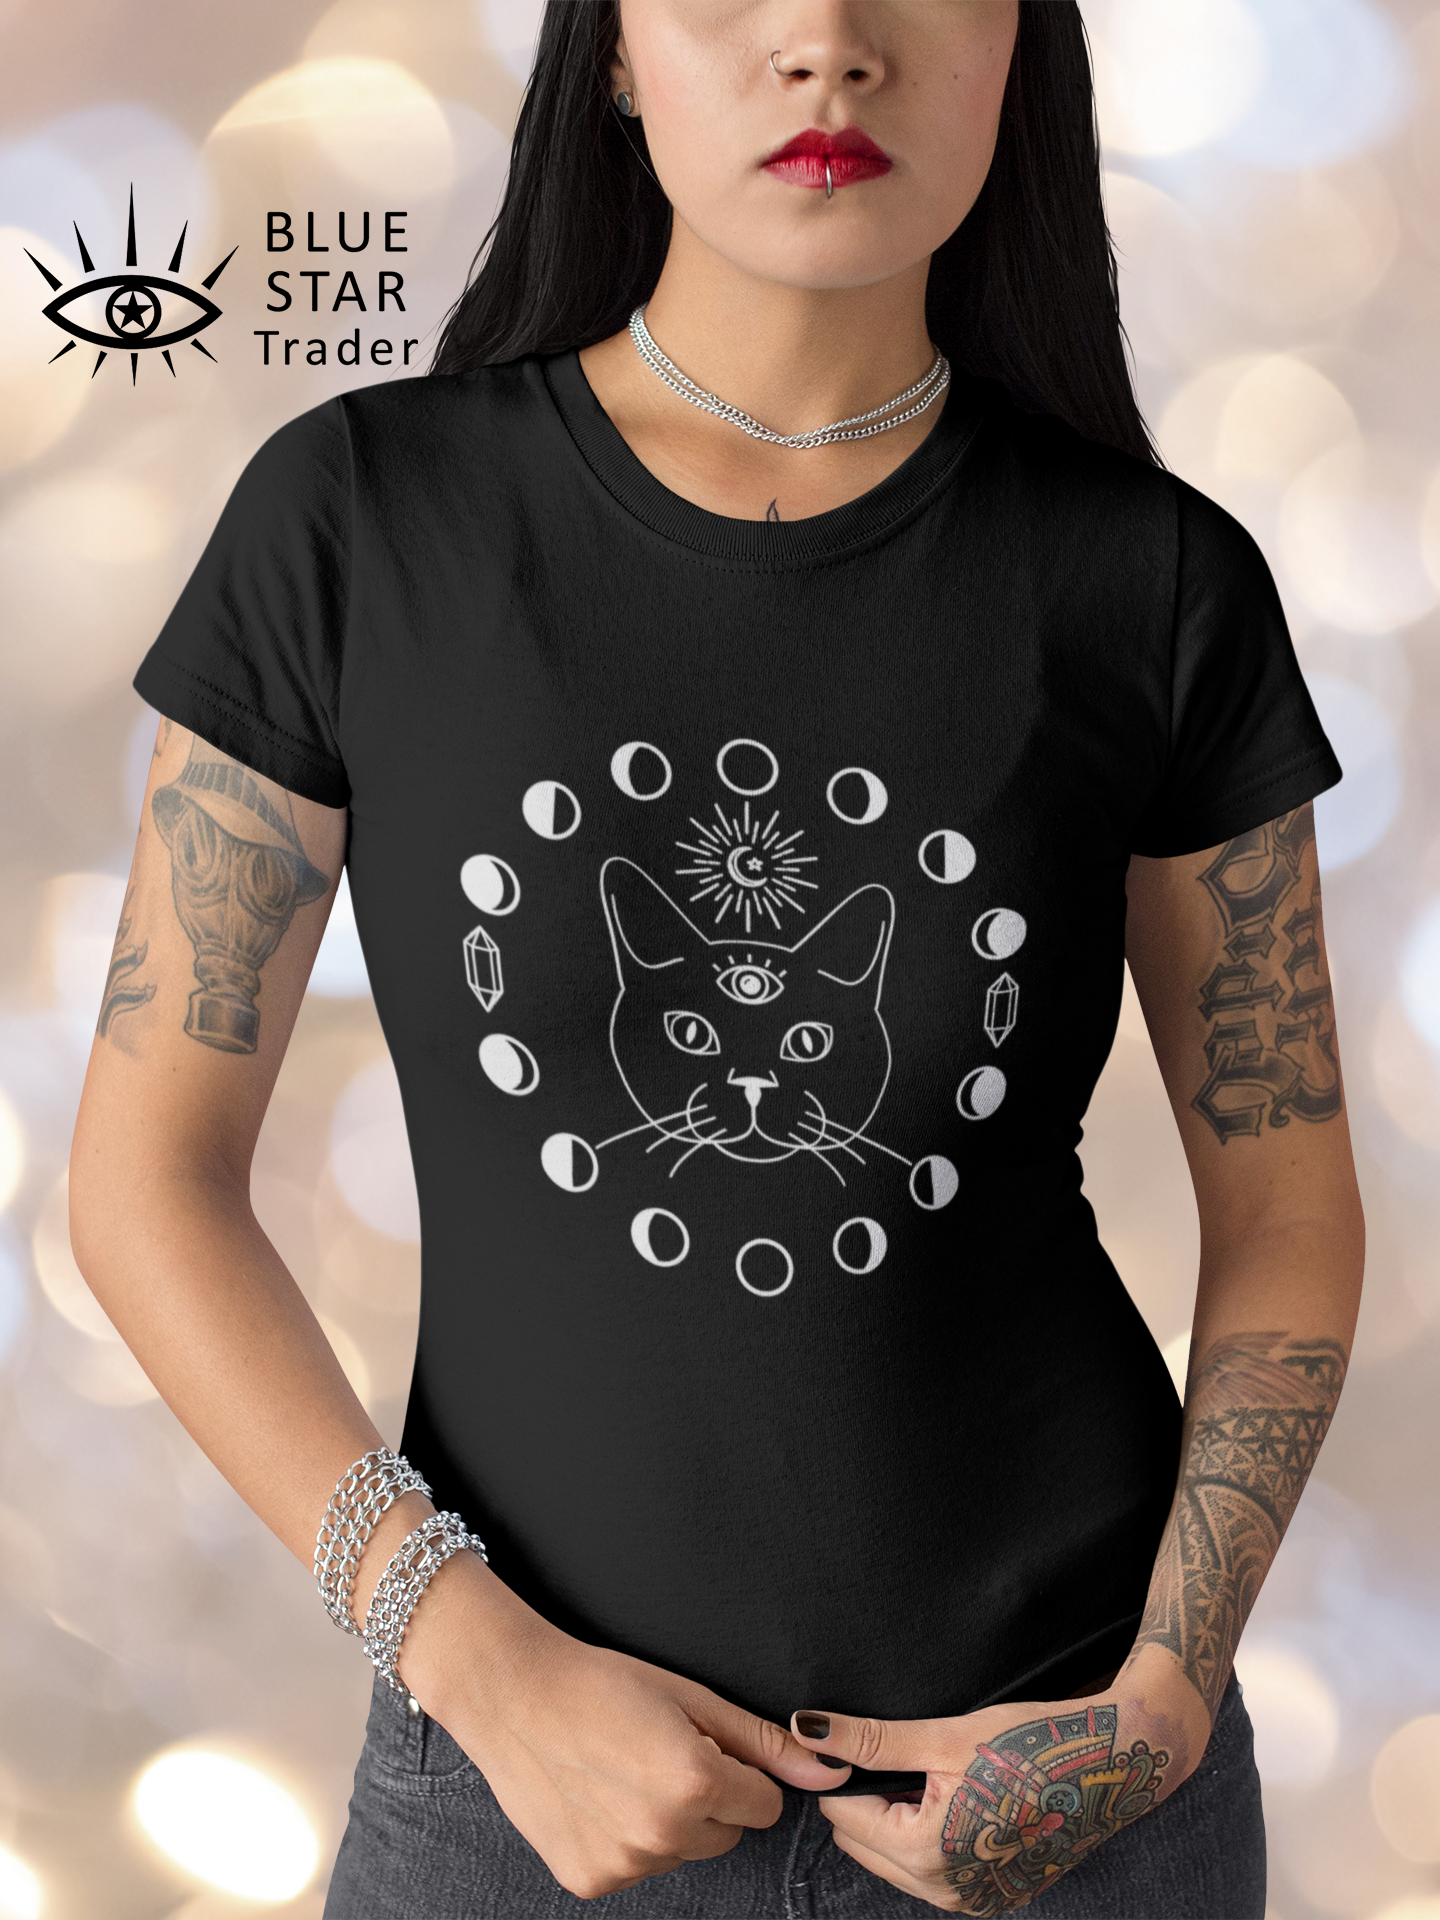 Witch Black Tee, Cat with Third Eye, Moon Phases and Crystals. Witch Shirt, Unisex Short Sleeve Tee, Womens T-Shirt, Clothing Clothes